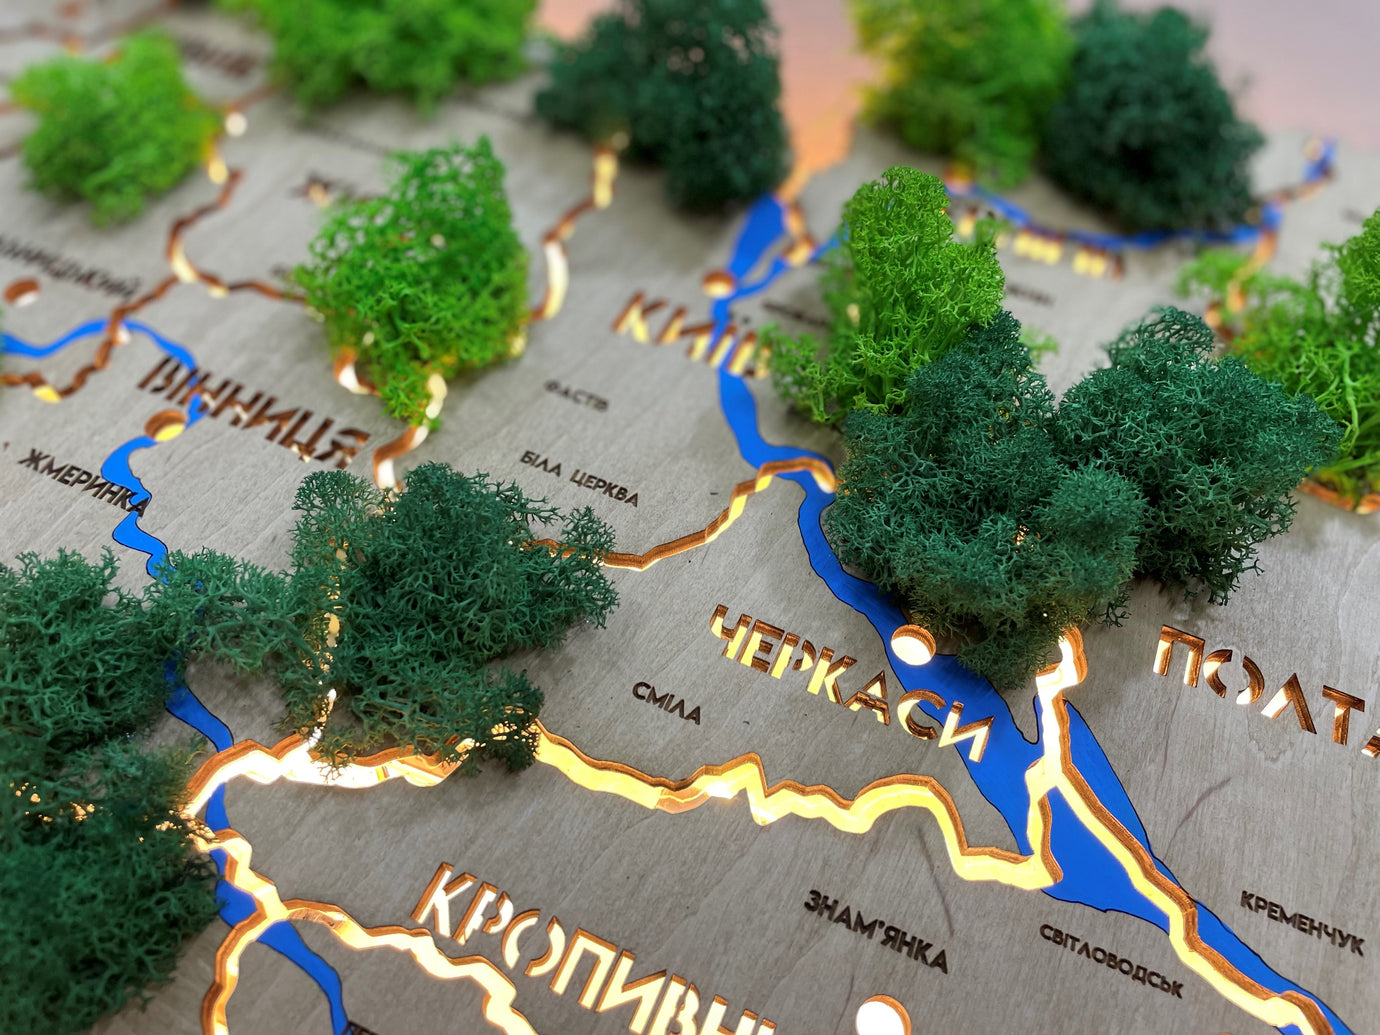 Ukraine LED map on acrylic glass with rivers, moss and backlighting  between regions color Oak